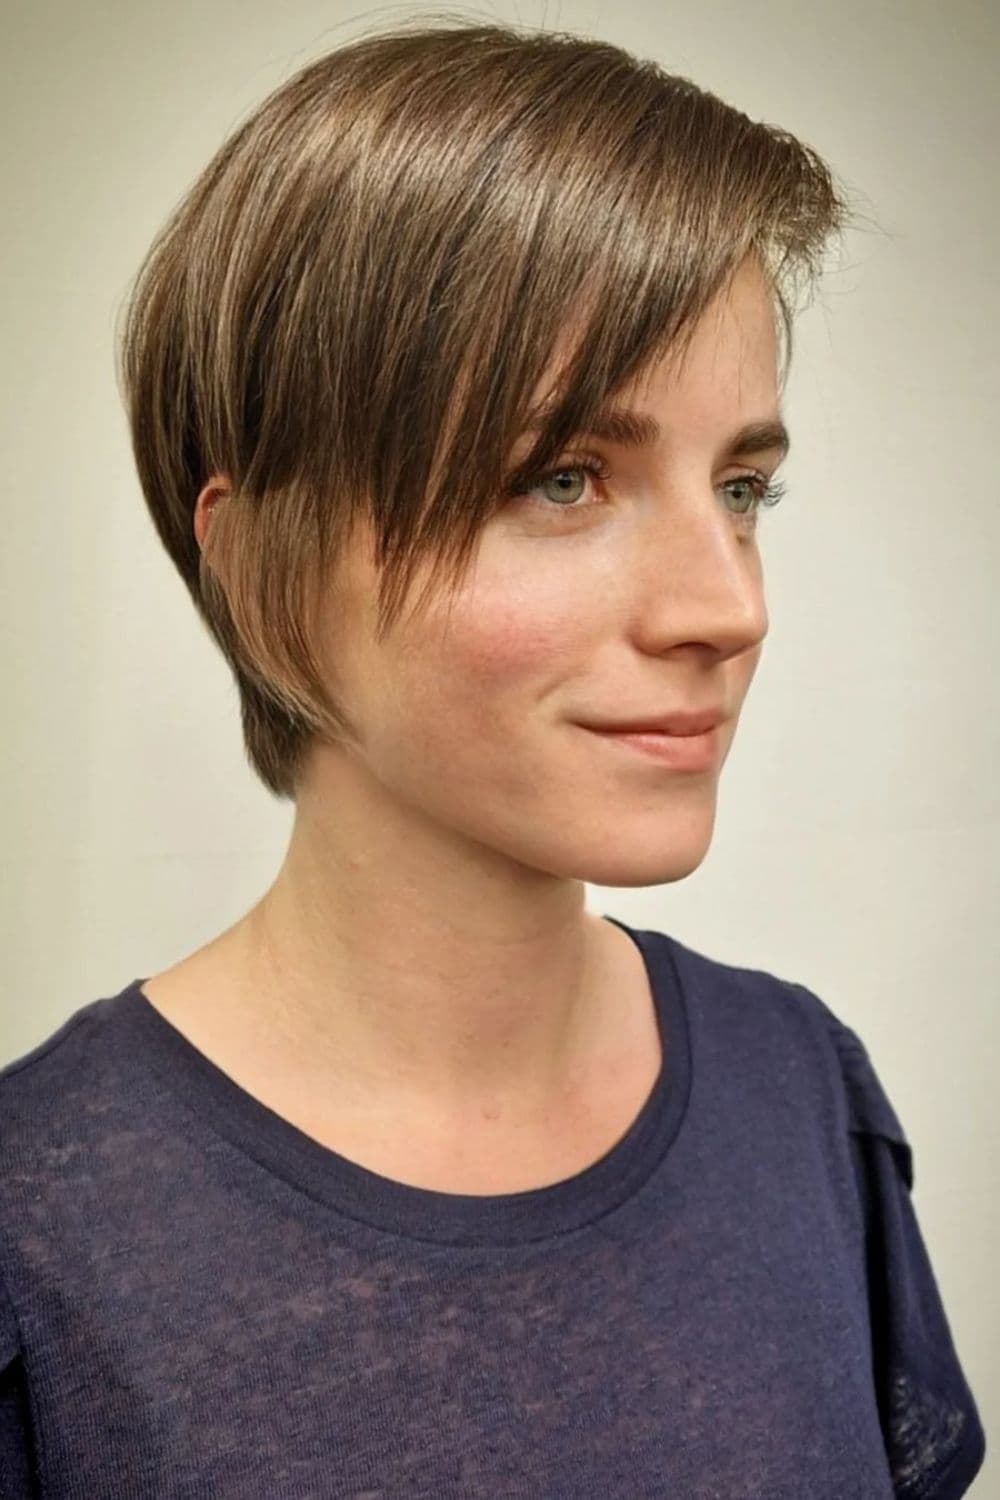 A woman in a black t-shirt with a graduated pixie cut.